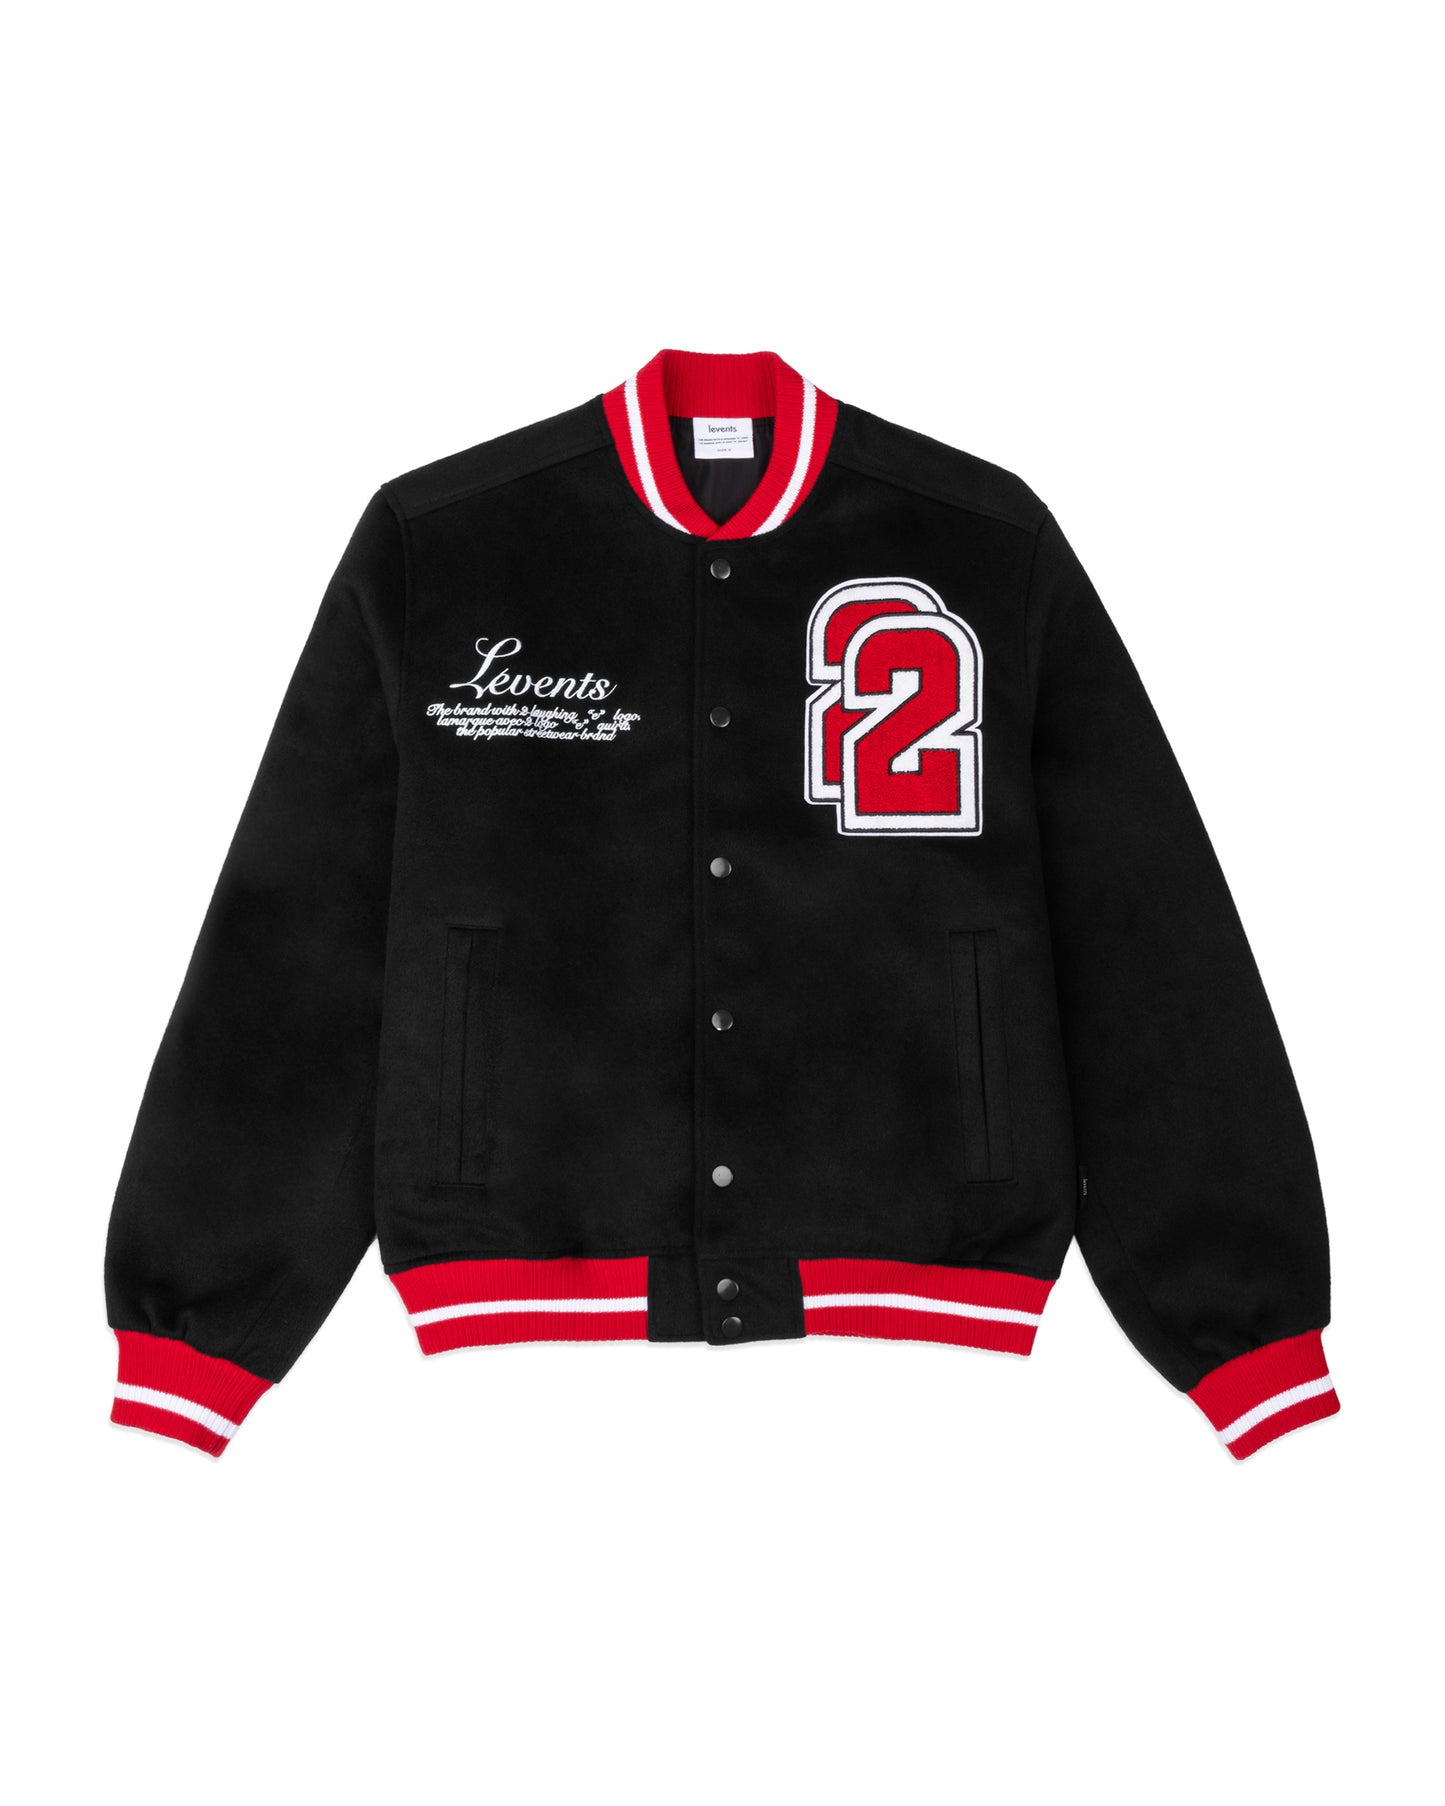 Levents® Punch Varsity Black/ Red